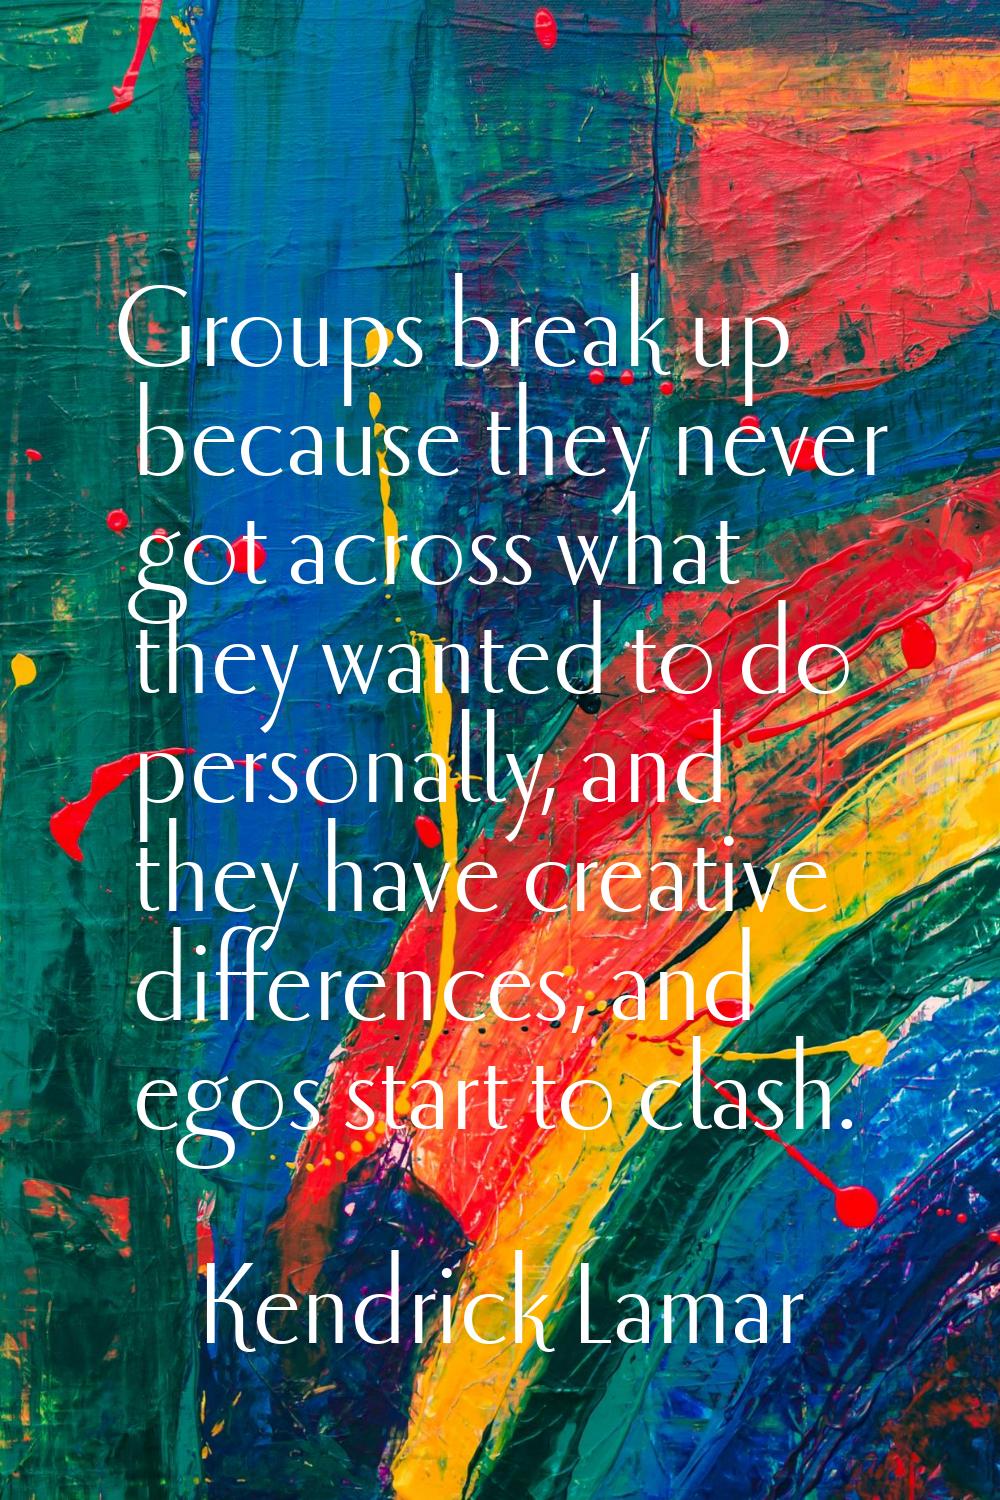 Groups break up because they never got across what they wanted to do personally, and they have crea